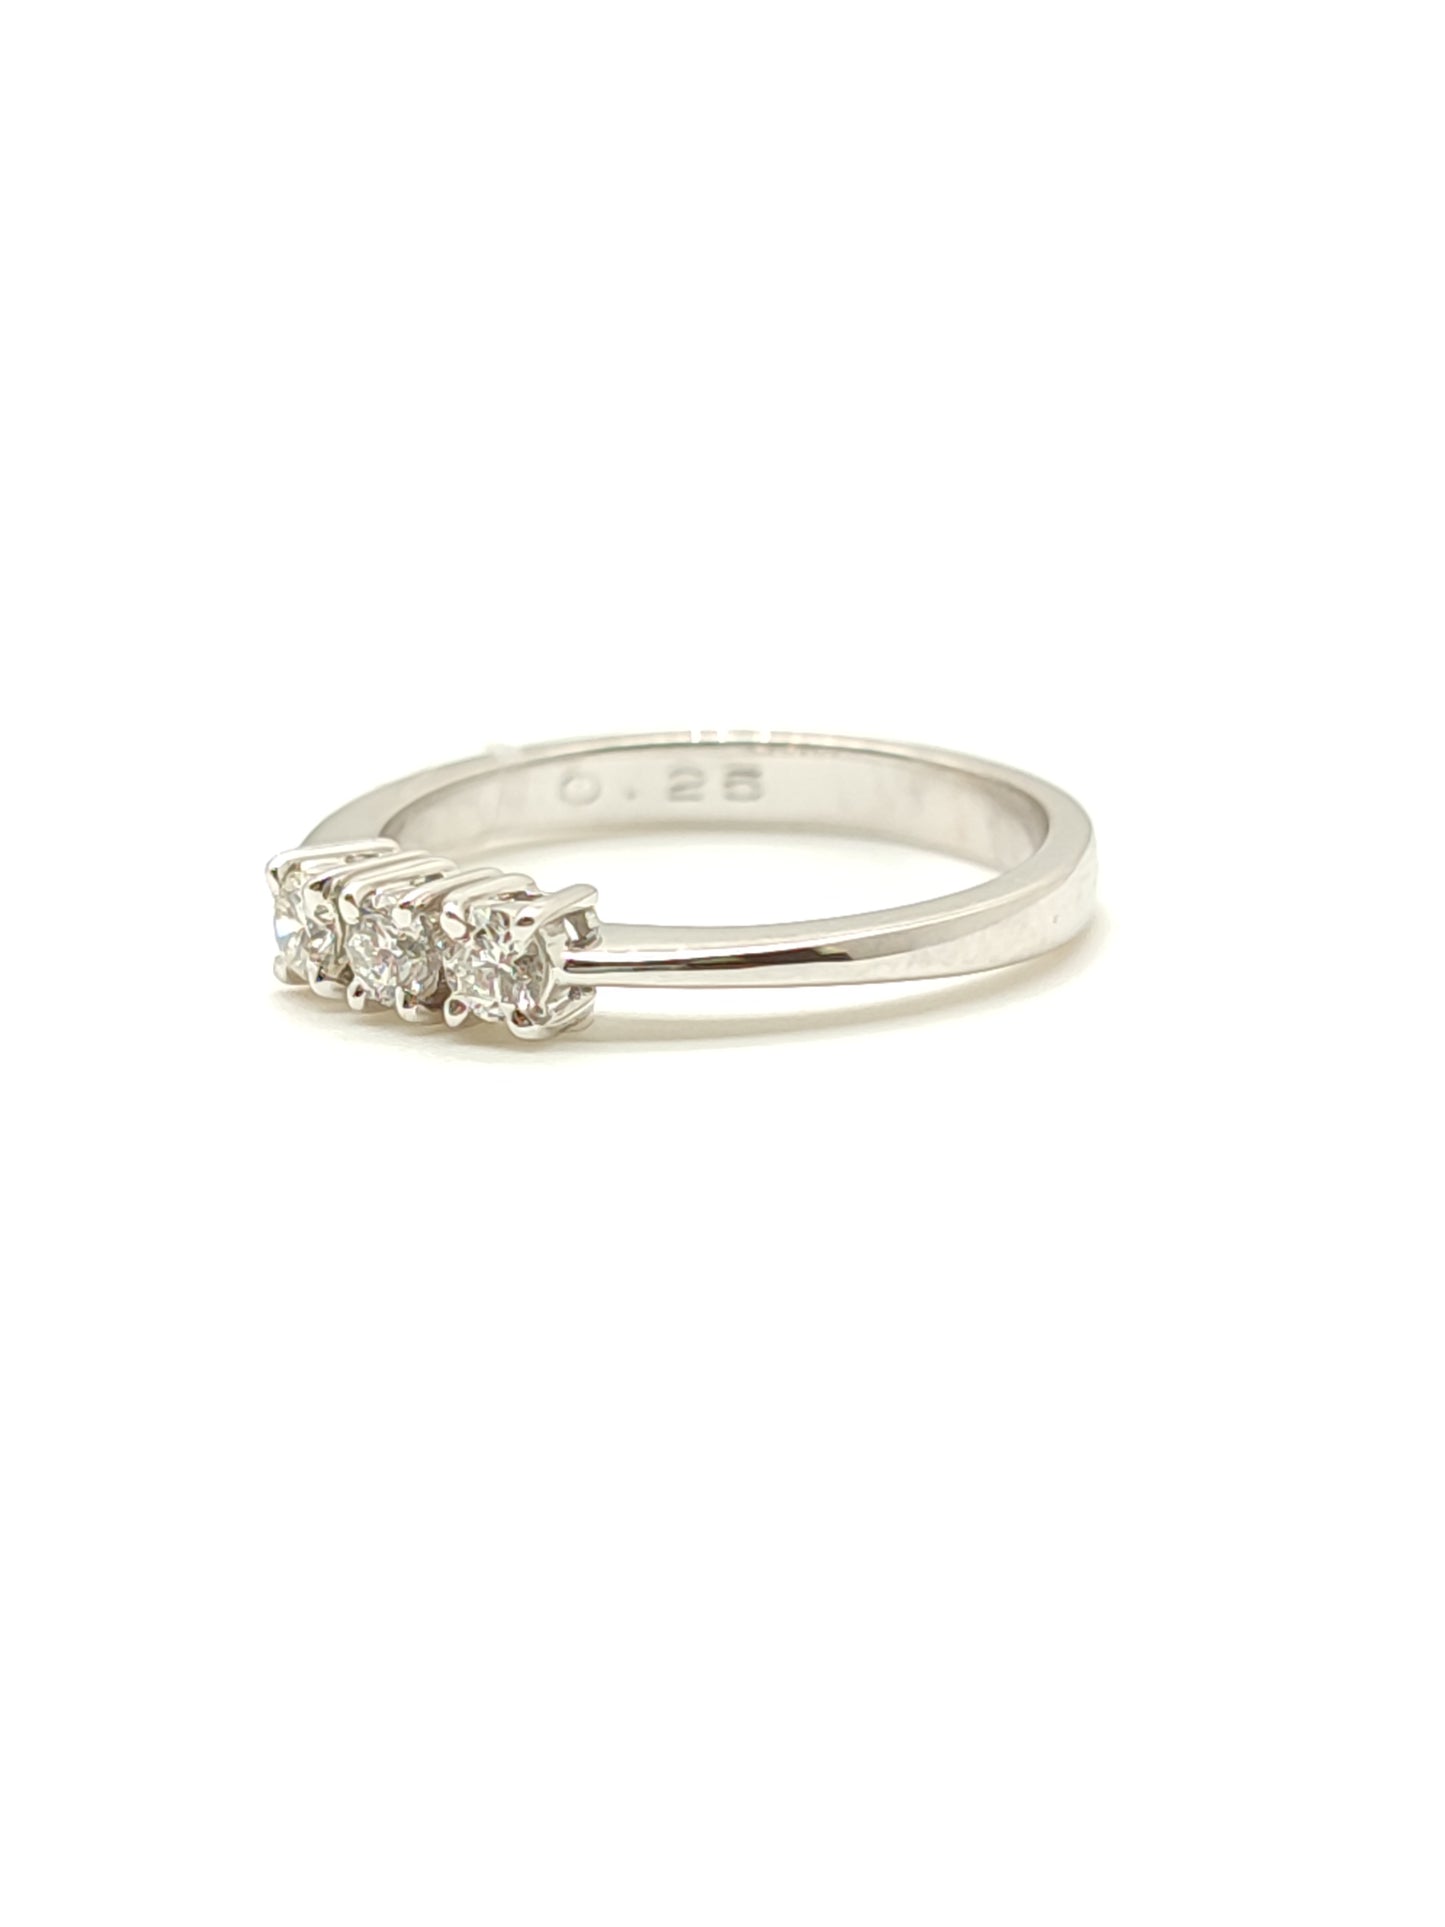 Gold trilogy ring with 0.25ct diamonds